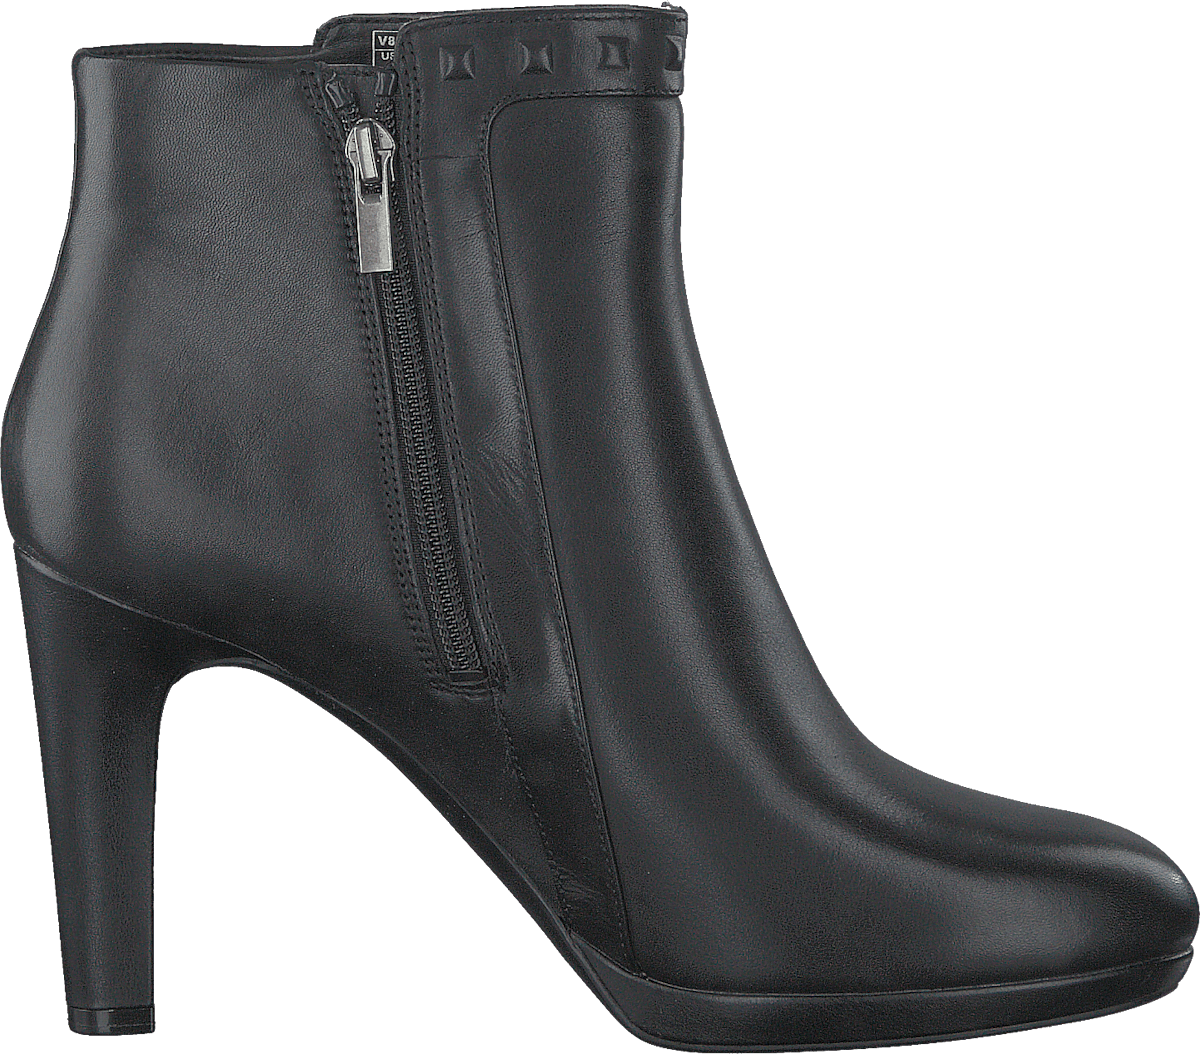 Seven To 7 Ally Stud Bootie Black